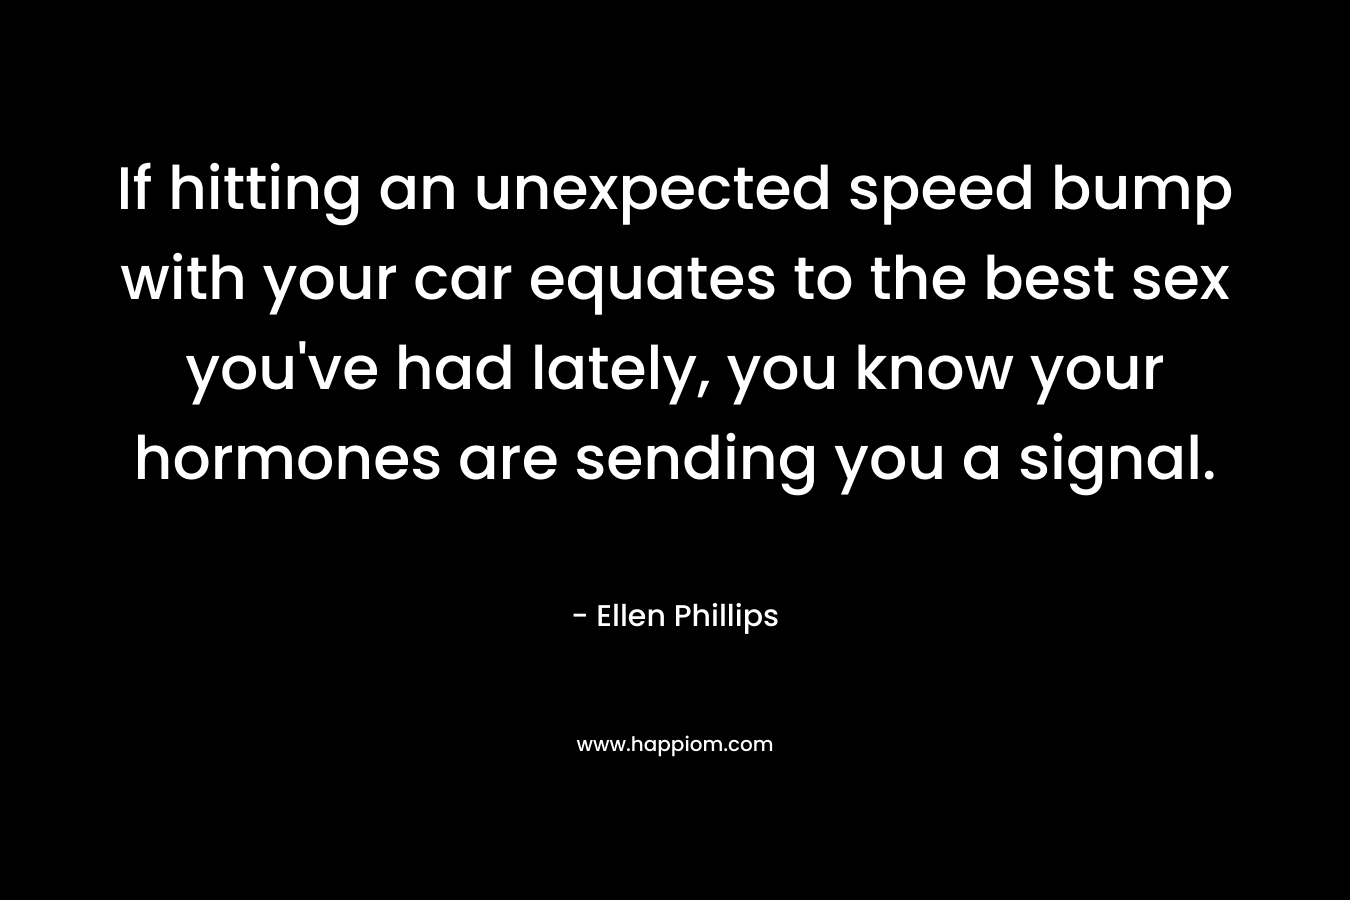 If hitting an unexpected speed bump with your car equates to the best sex you’ve had lately, you know your hormones are sending you a signal. – Ellen Phillips